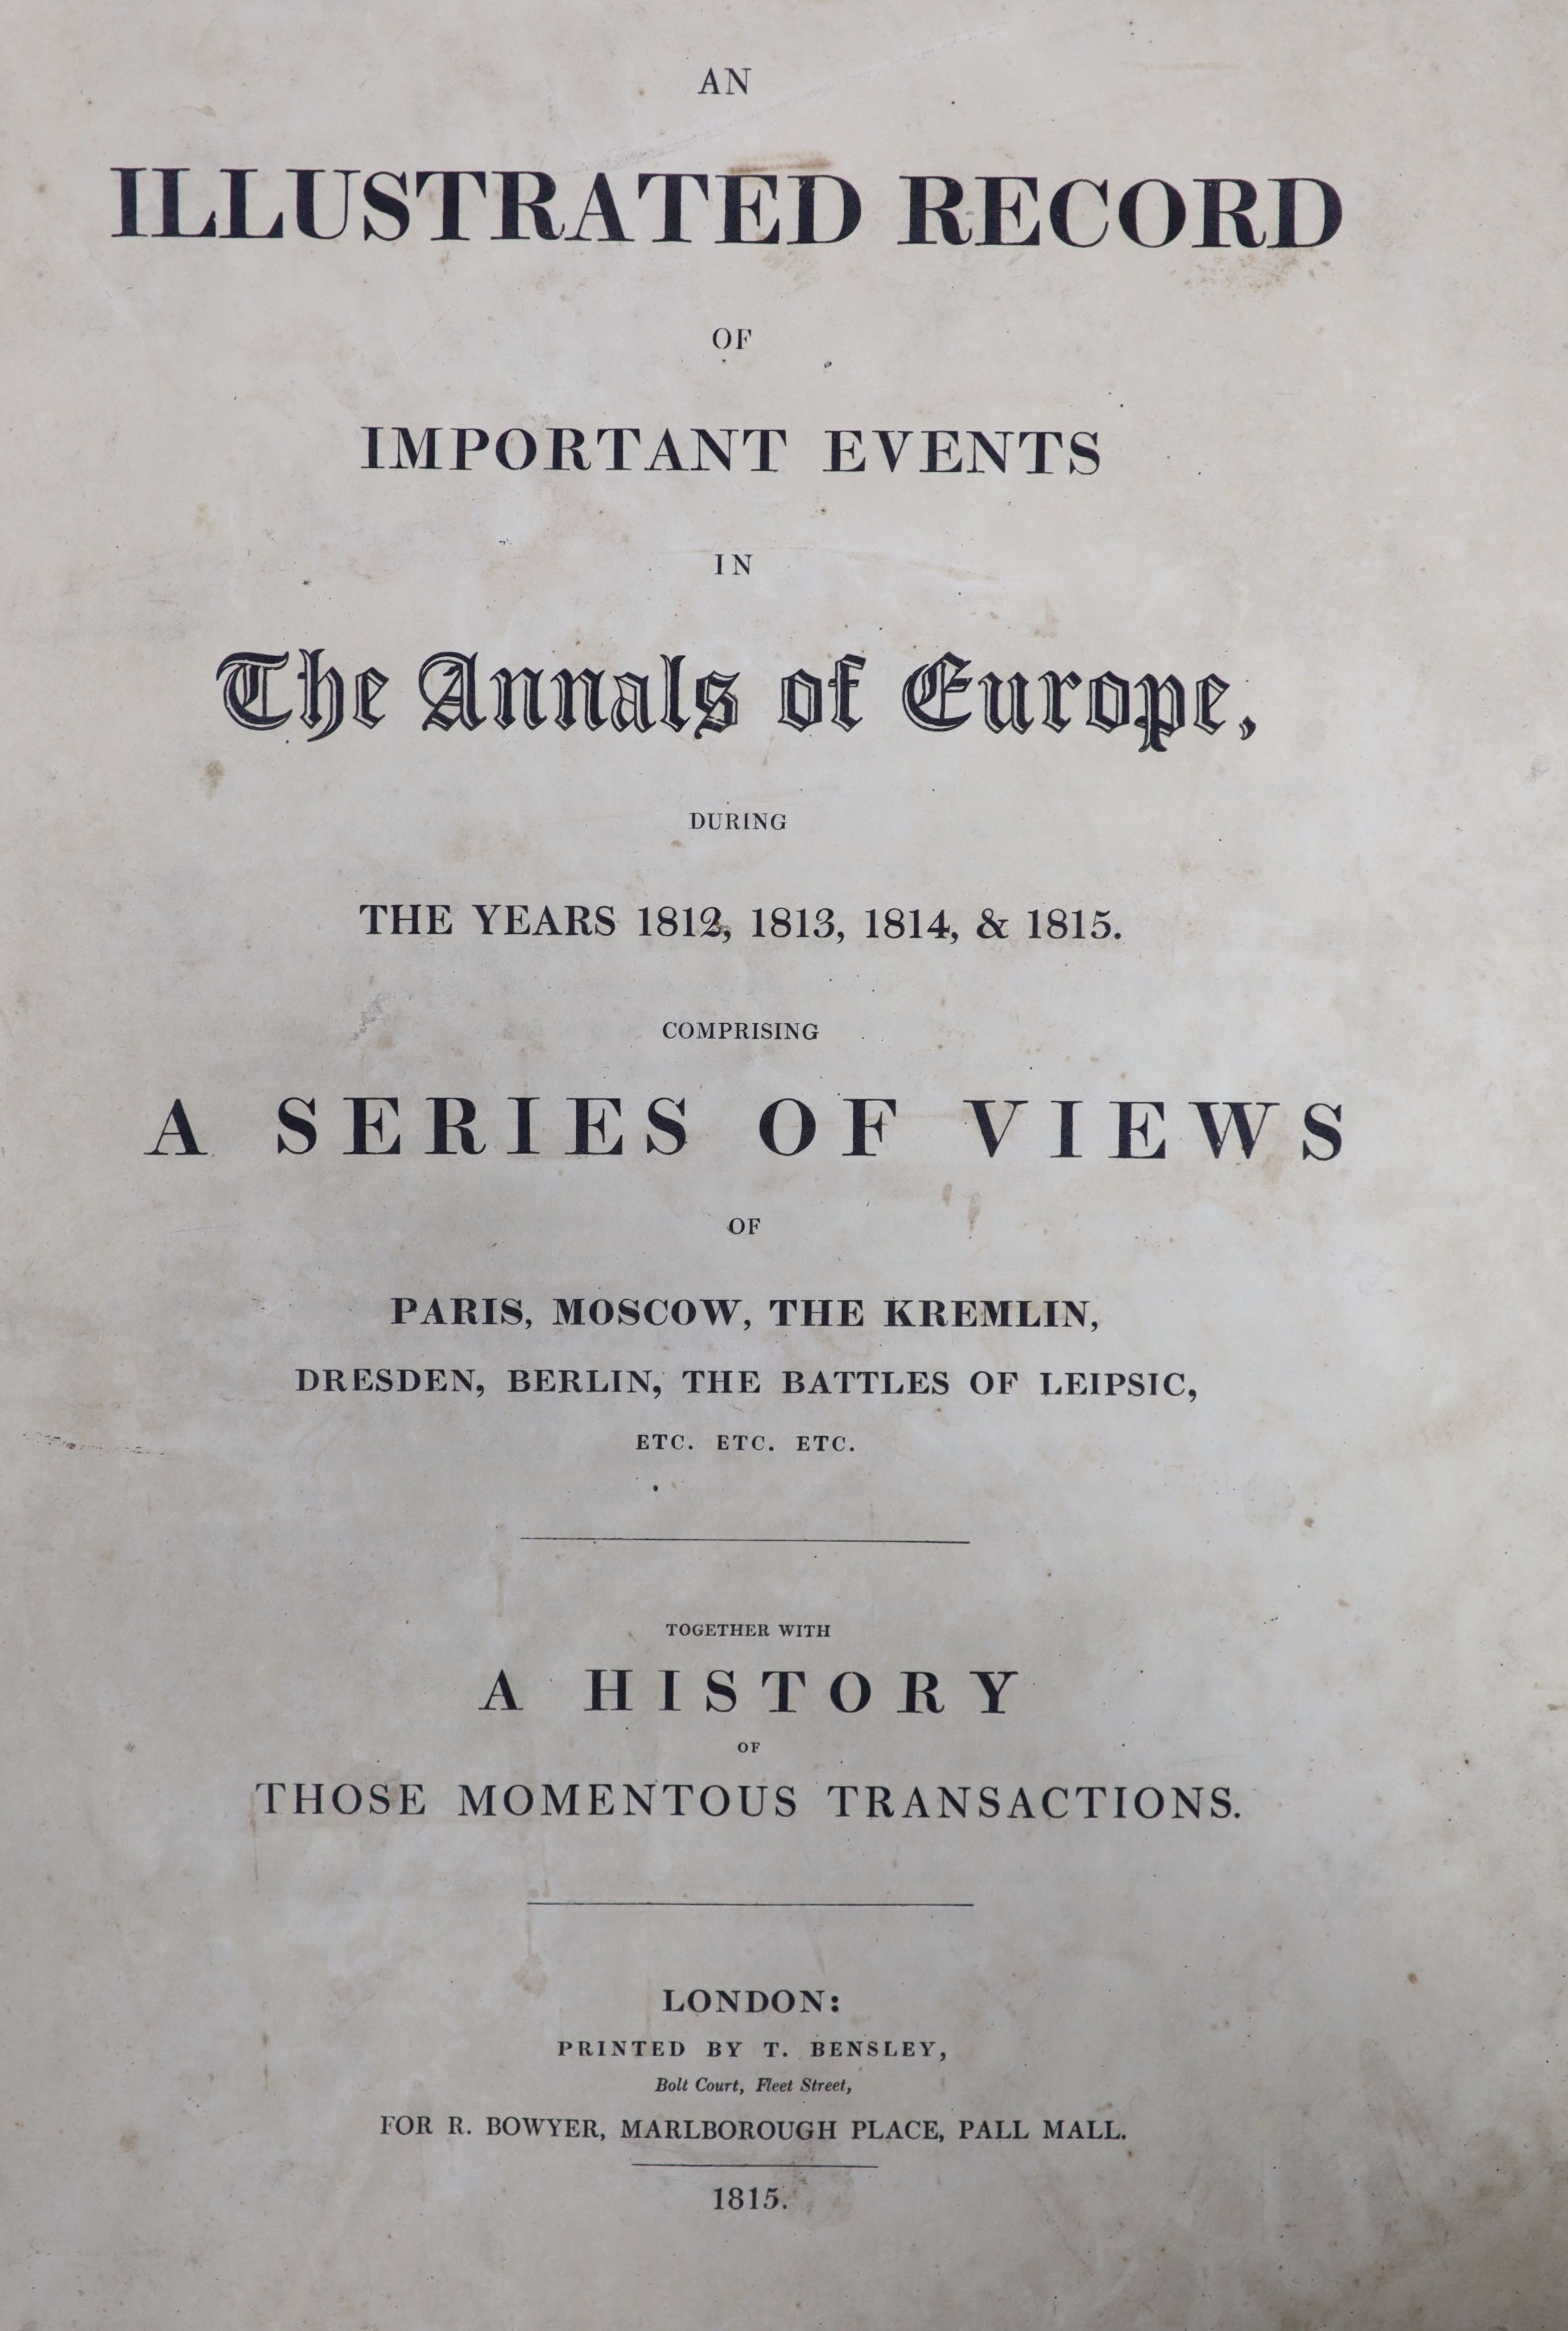 Bowyer, Robert - An Illustrated Record of Important Events in the Annals of Europe, first edition, folio, rebound quarter blue morocco, with 21 plates, T. Bensley, for Robert Bowyer, London, 1815